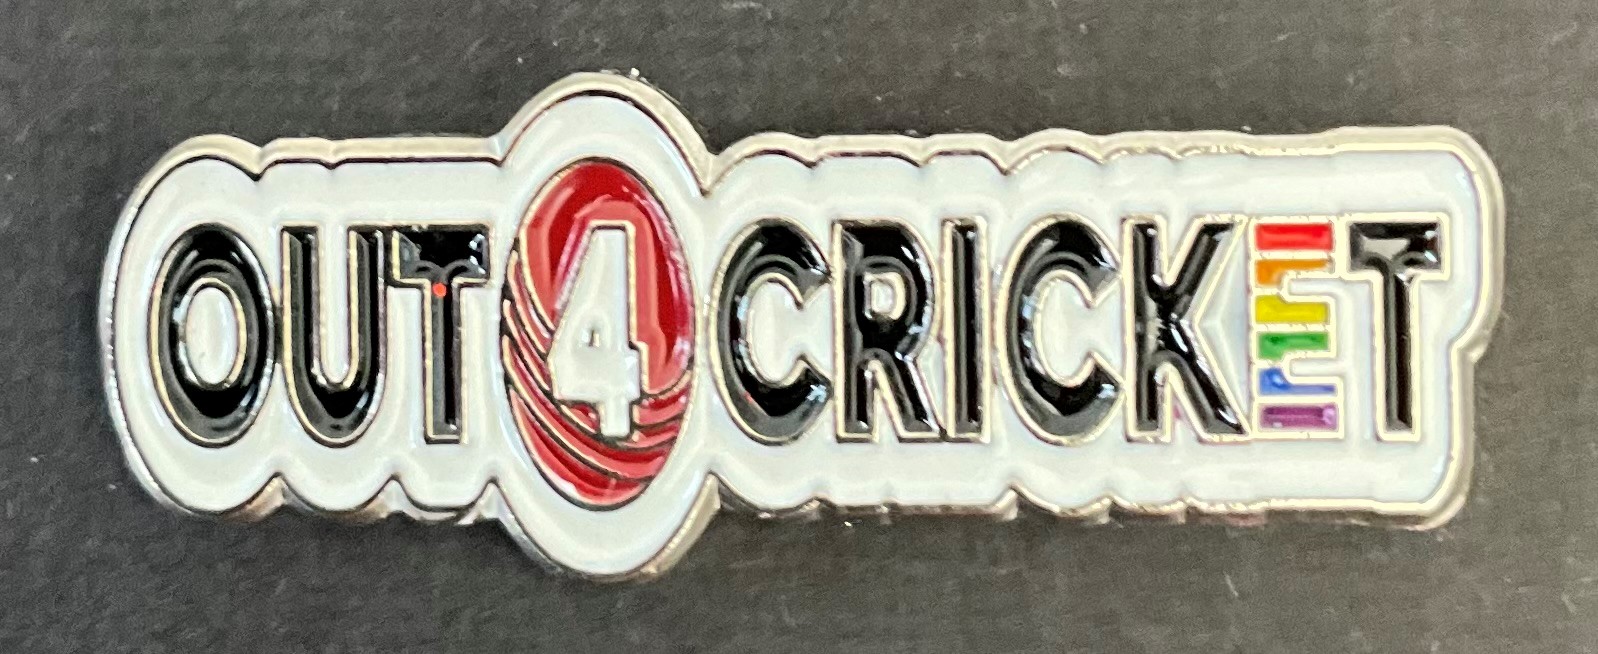 out 4 cricket badge